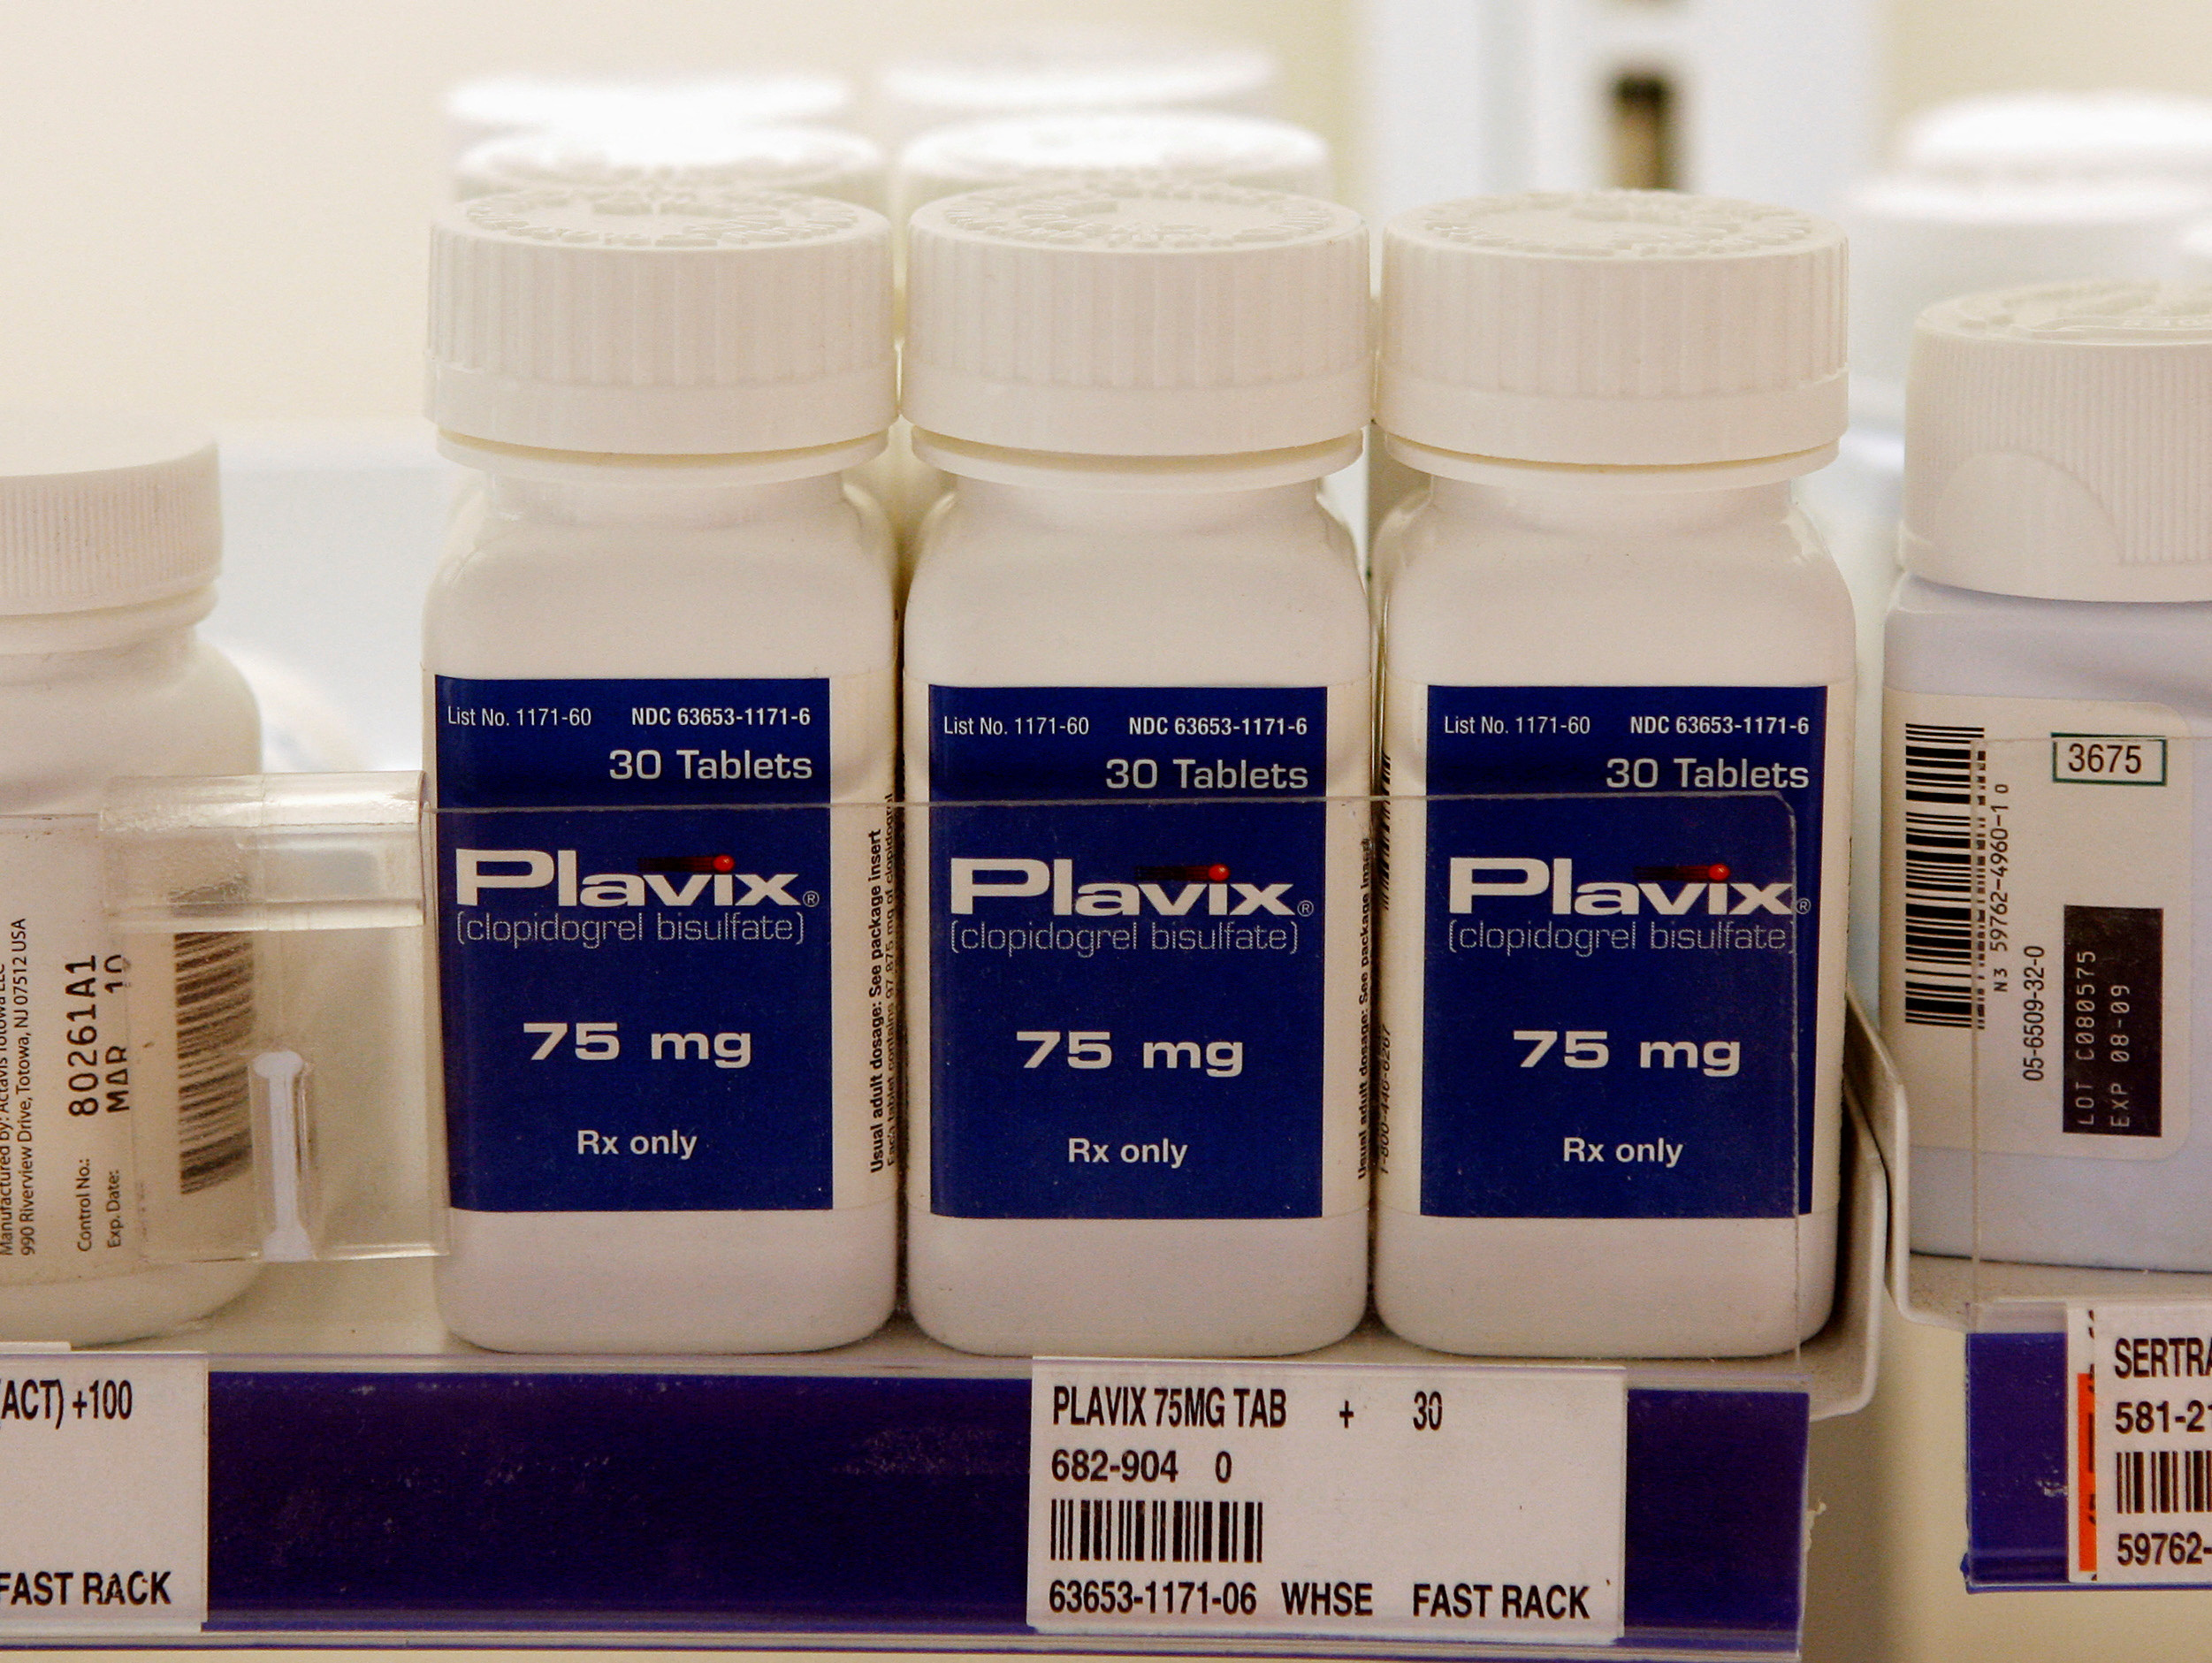 Bottles of Plavix are displayed on the shelves at a pharmacy in North Aurora, Illinois.